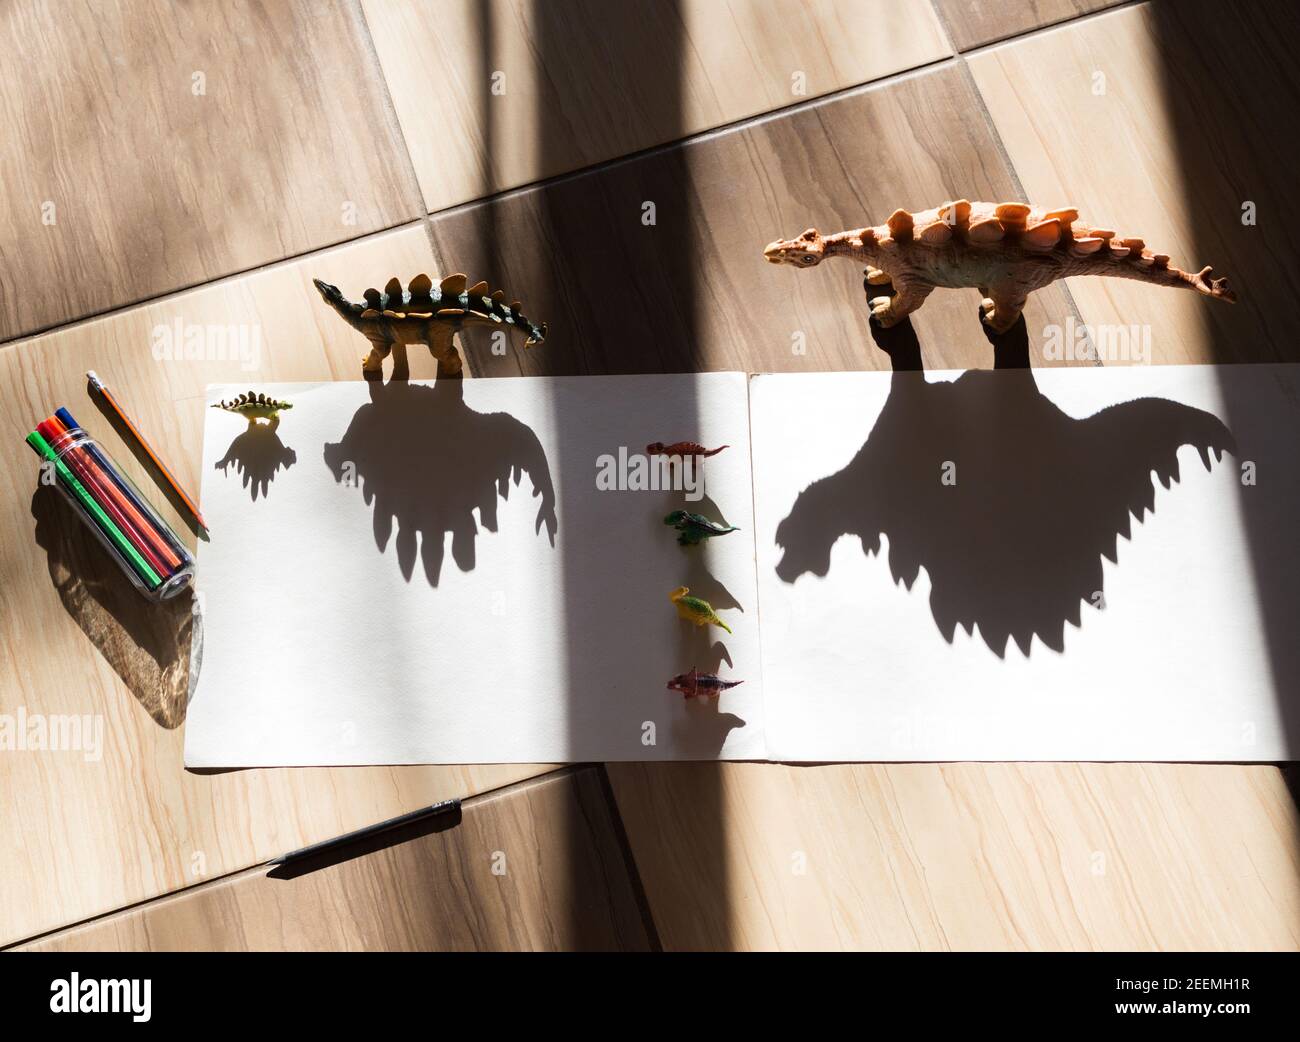 Playing with light and shadow. Outline the shadow of the toy dinosaur figure. Childhood, games for the development of children's creativity at home Stock Photo